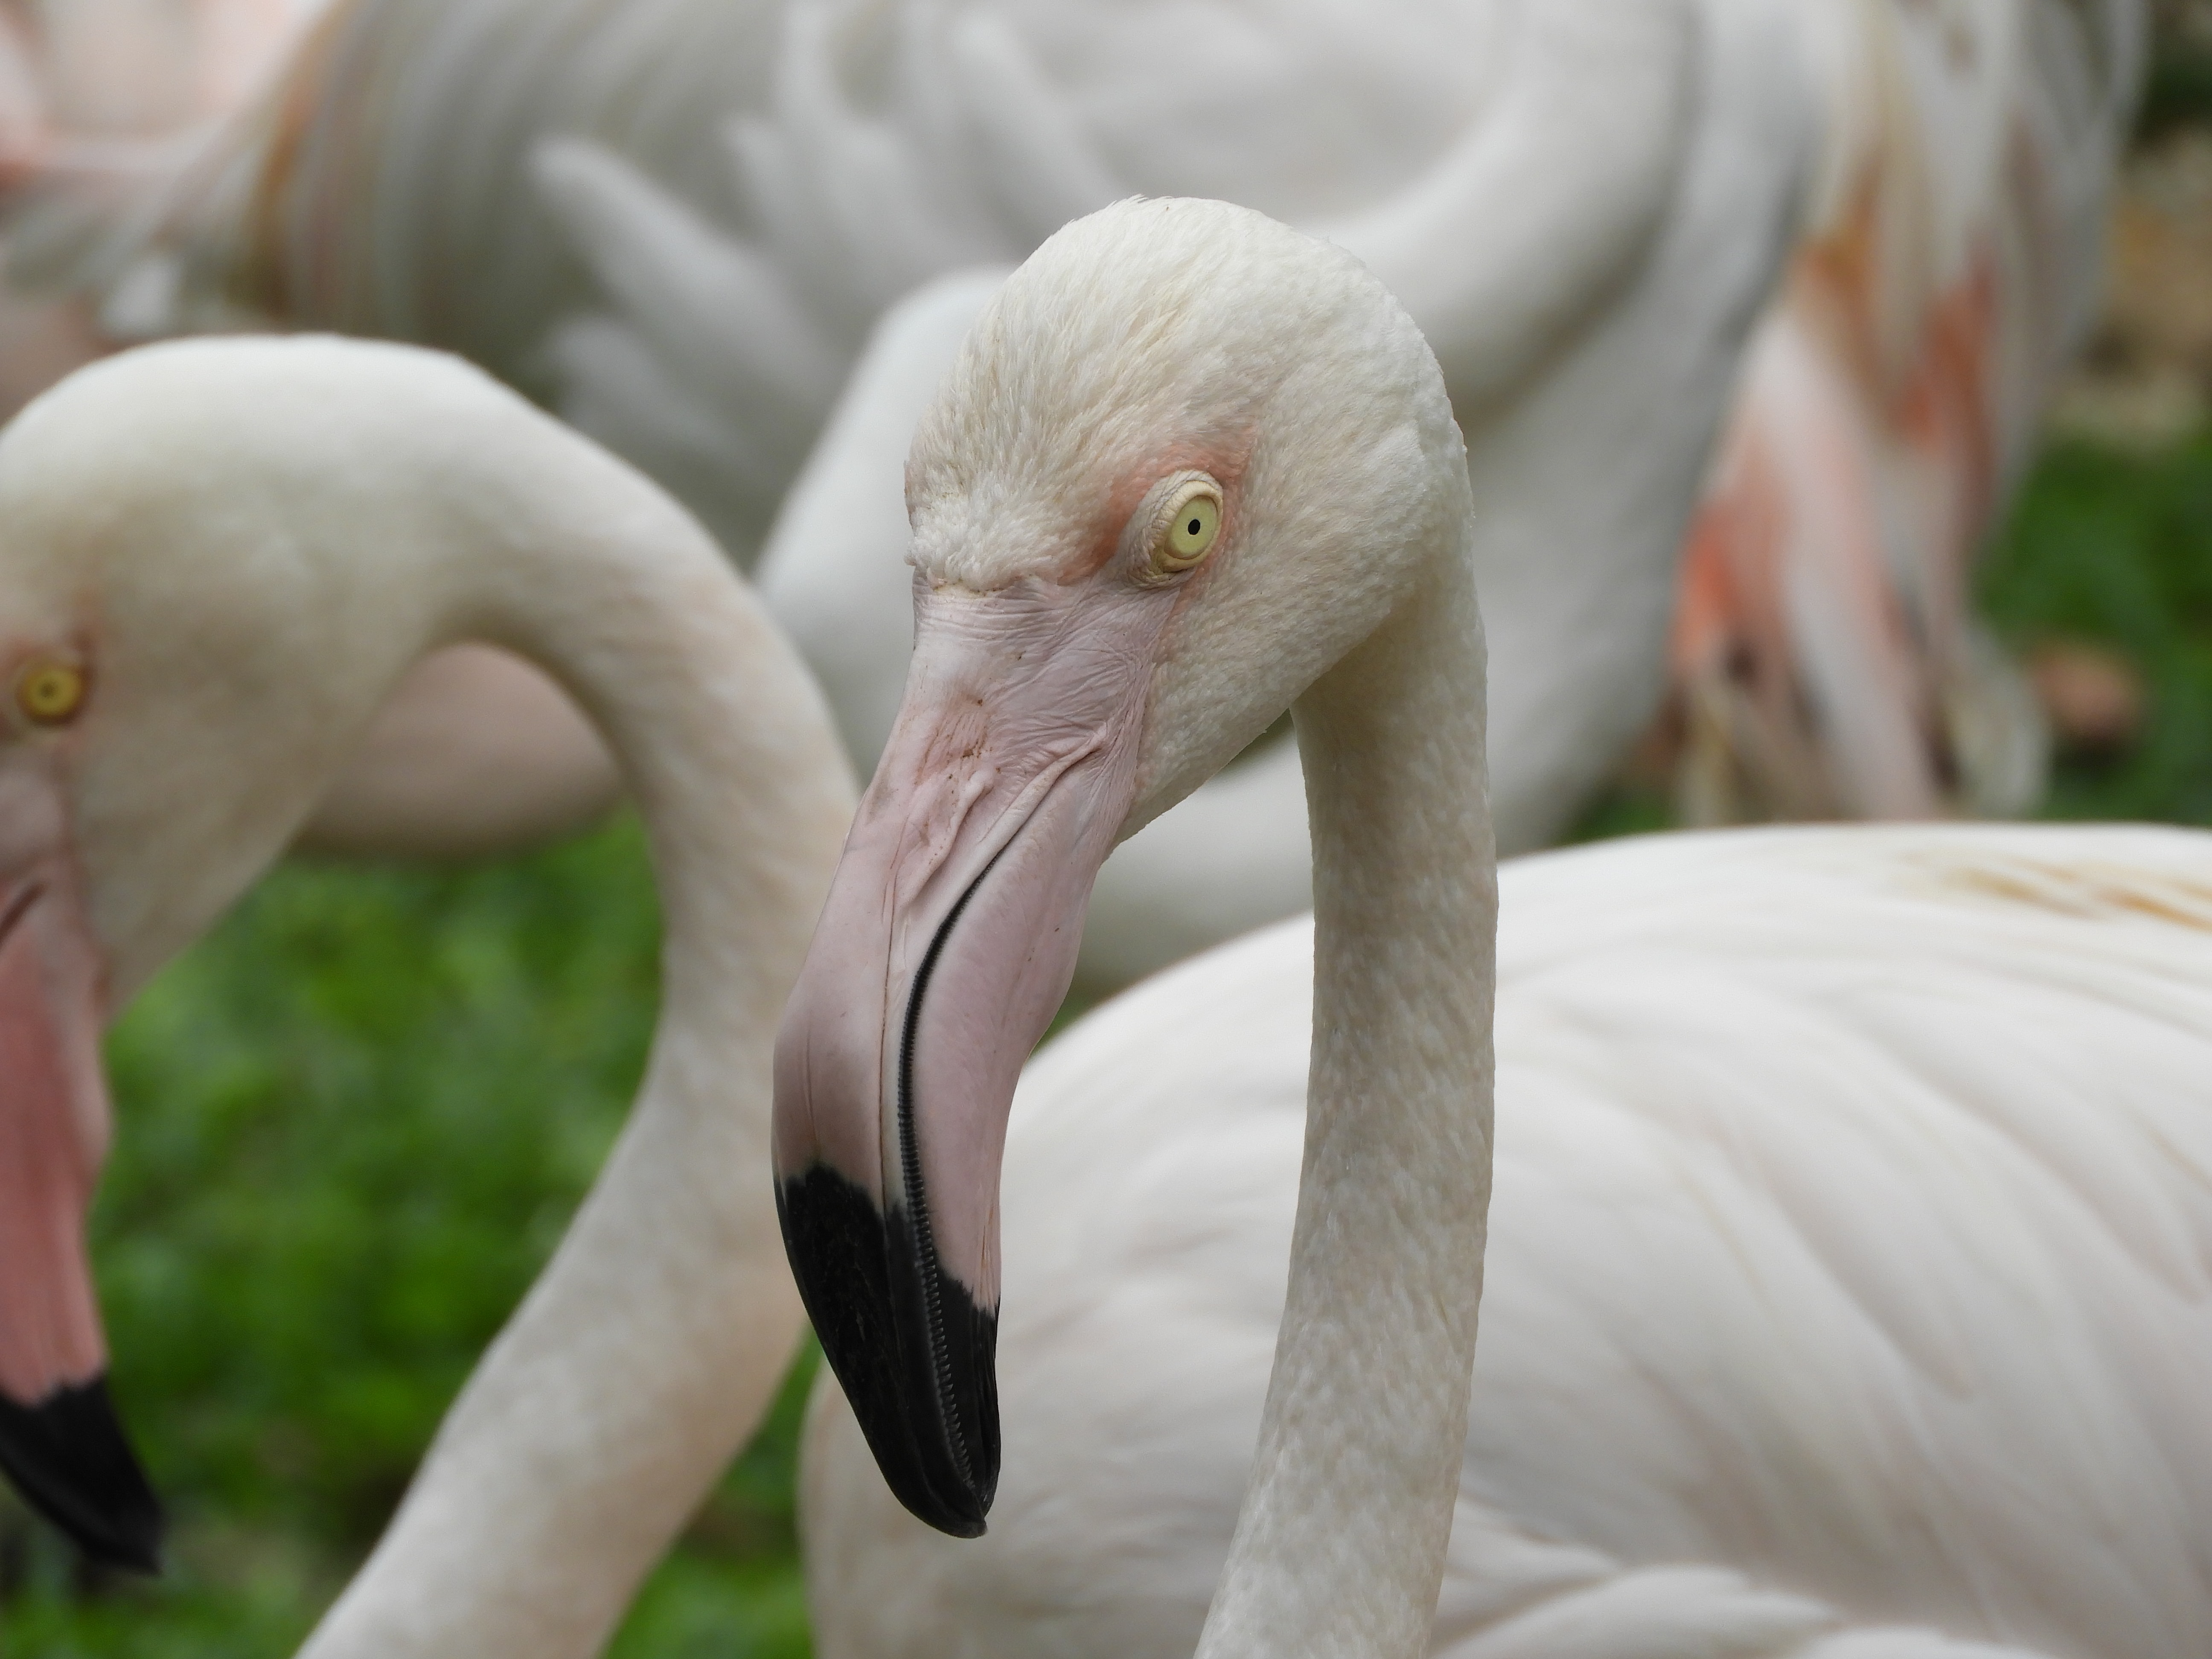 Not all flamingos are brightly colored, some are grey or white.